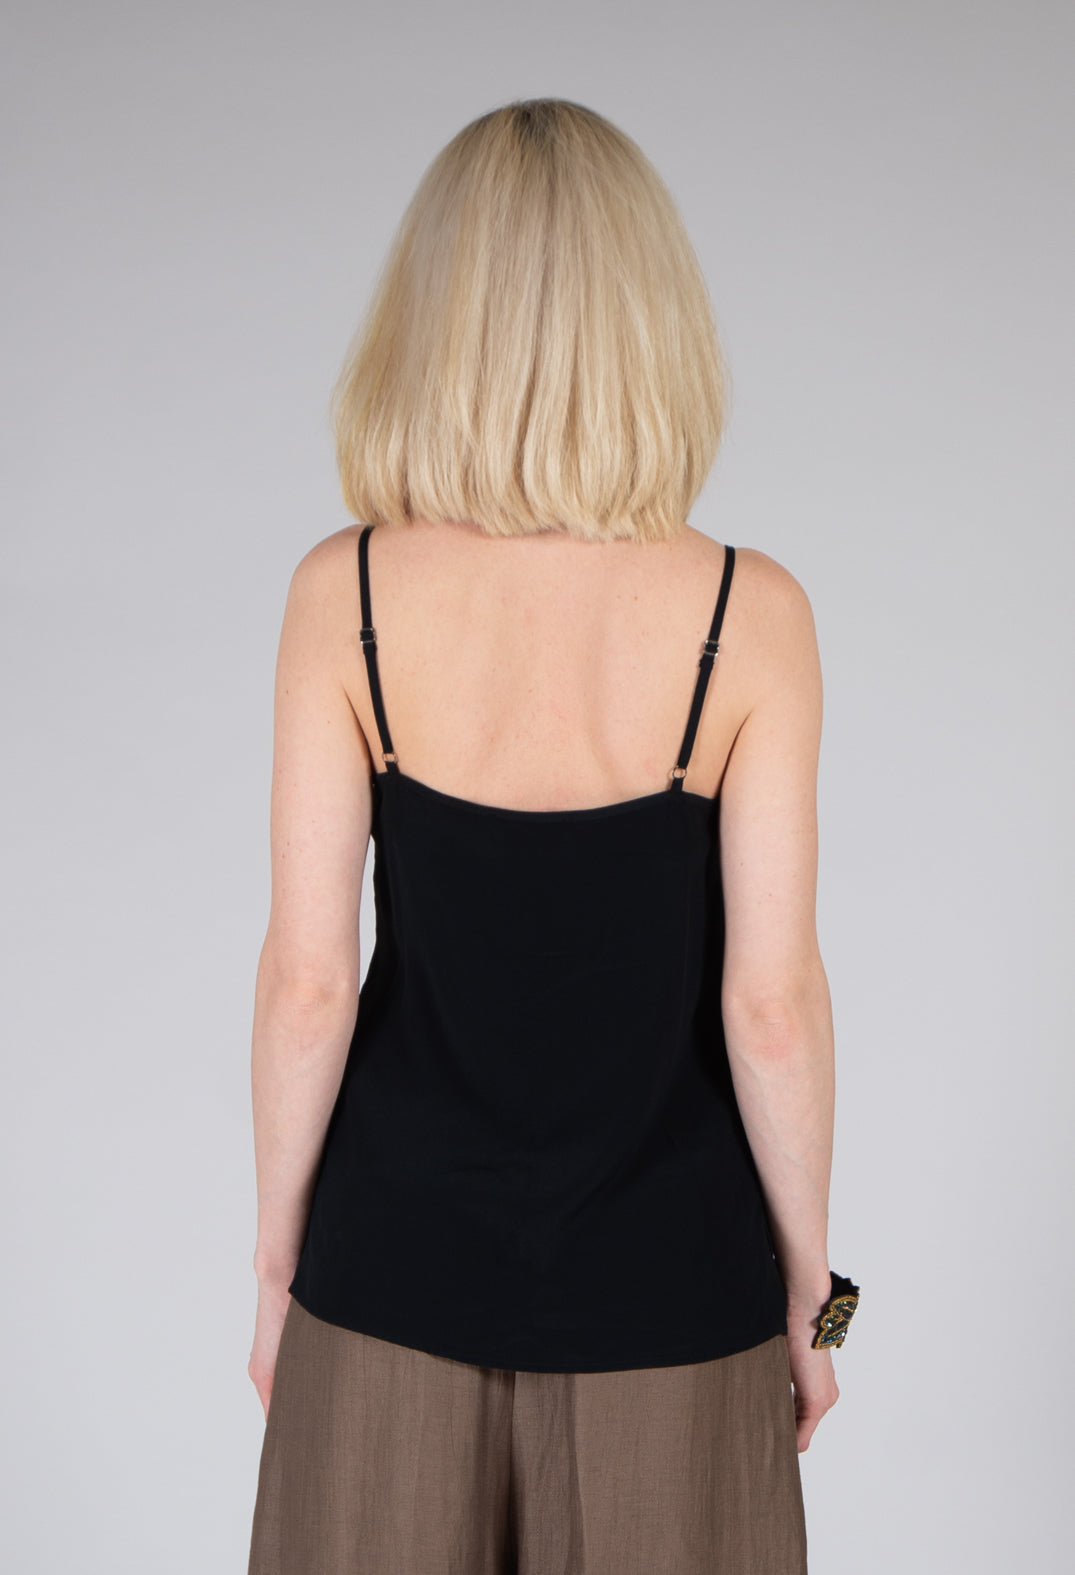 Beatrice B cami top in black with lace detail